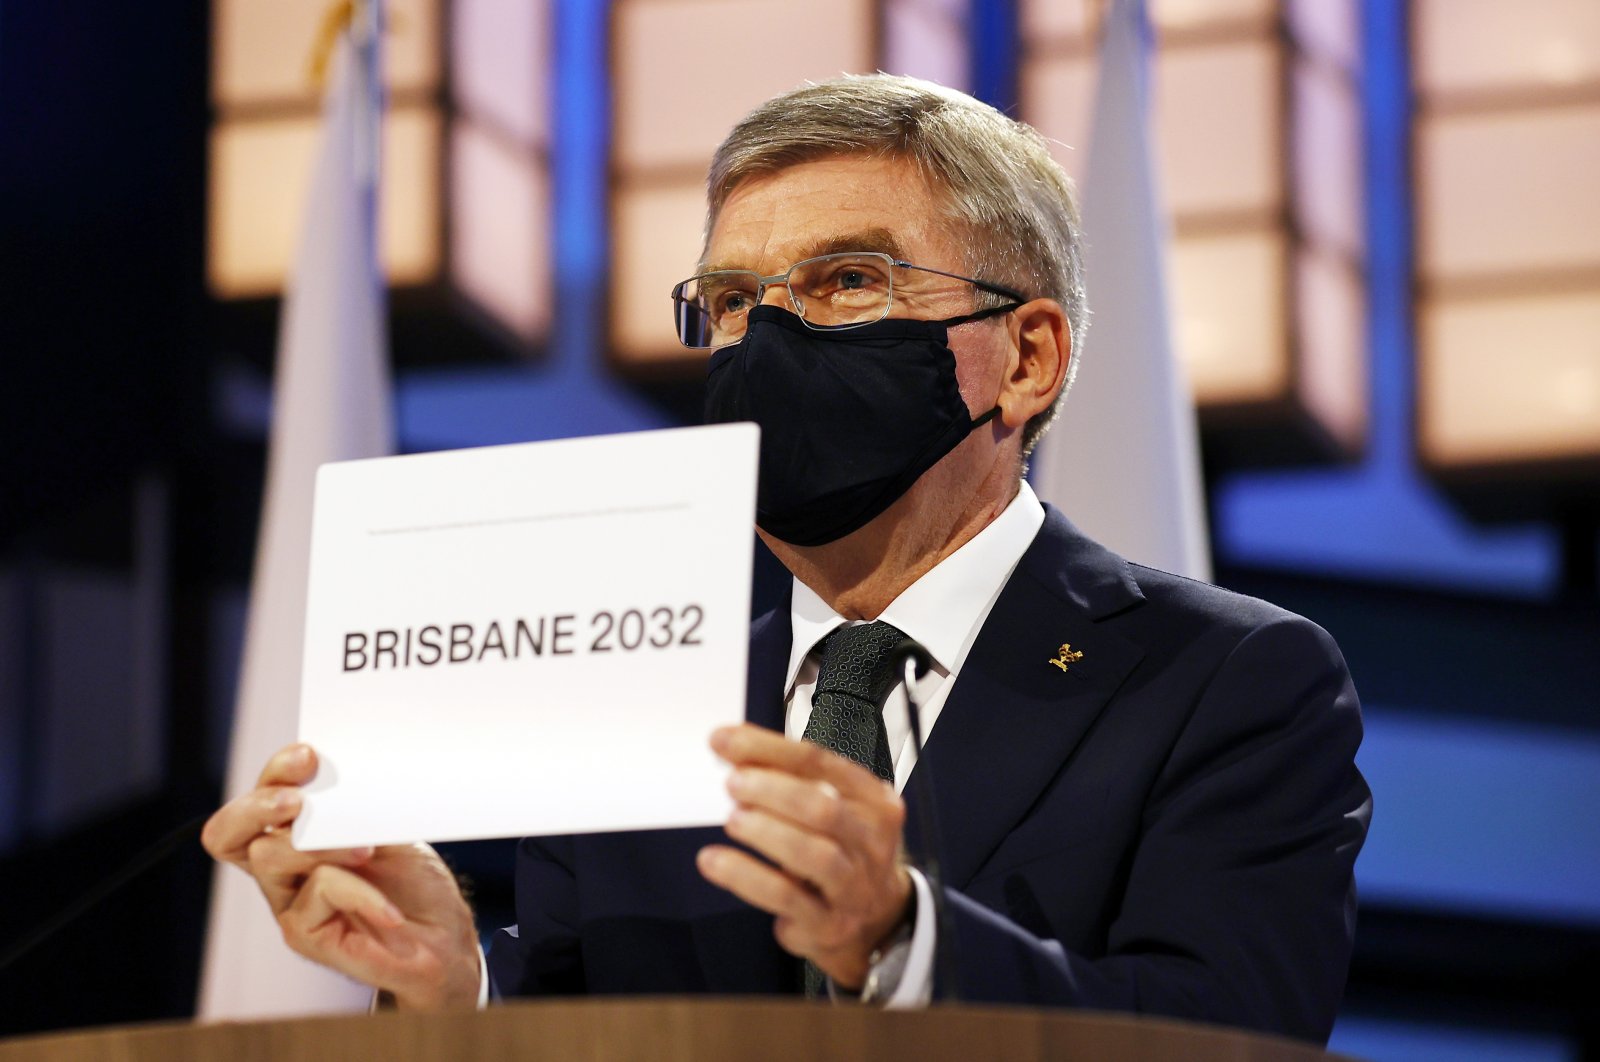 President of the International Olympic Committee Thomas Bach announces Brisbane as the 2032 Summer Olympics host city during the 138th IOC Session in Tokyo, Japan, July 21, 2021. (AP Photo)